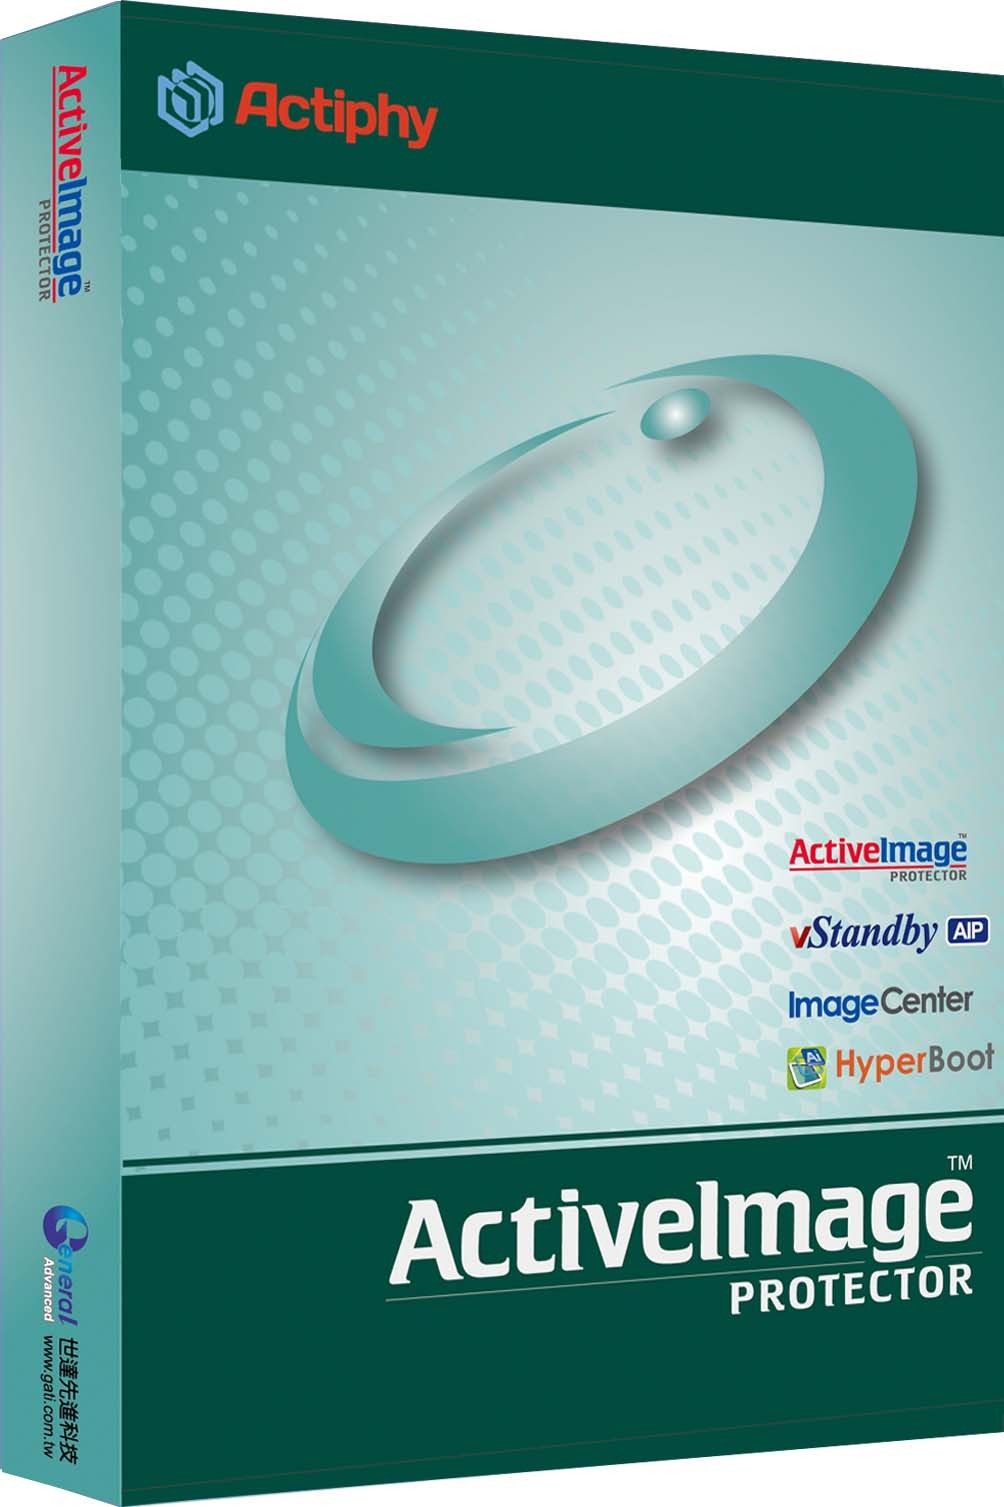 Actiphy ActiveImage Protector 2018 (AIP) DM       